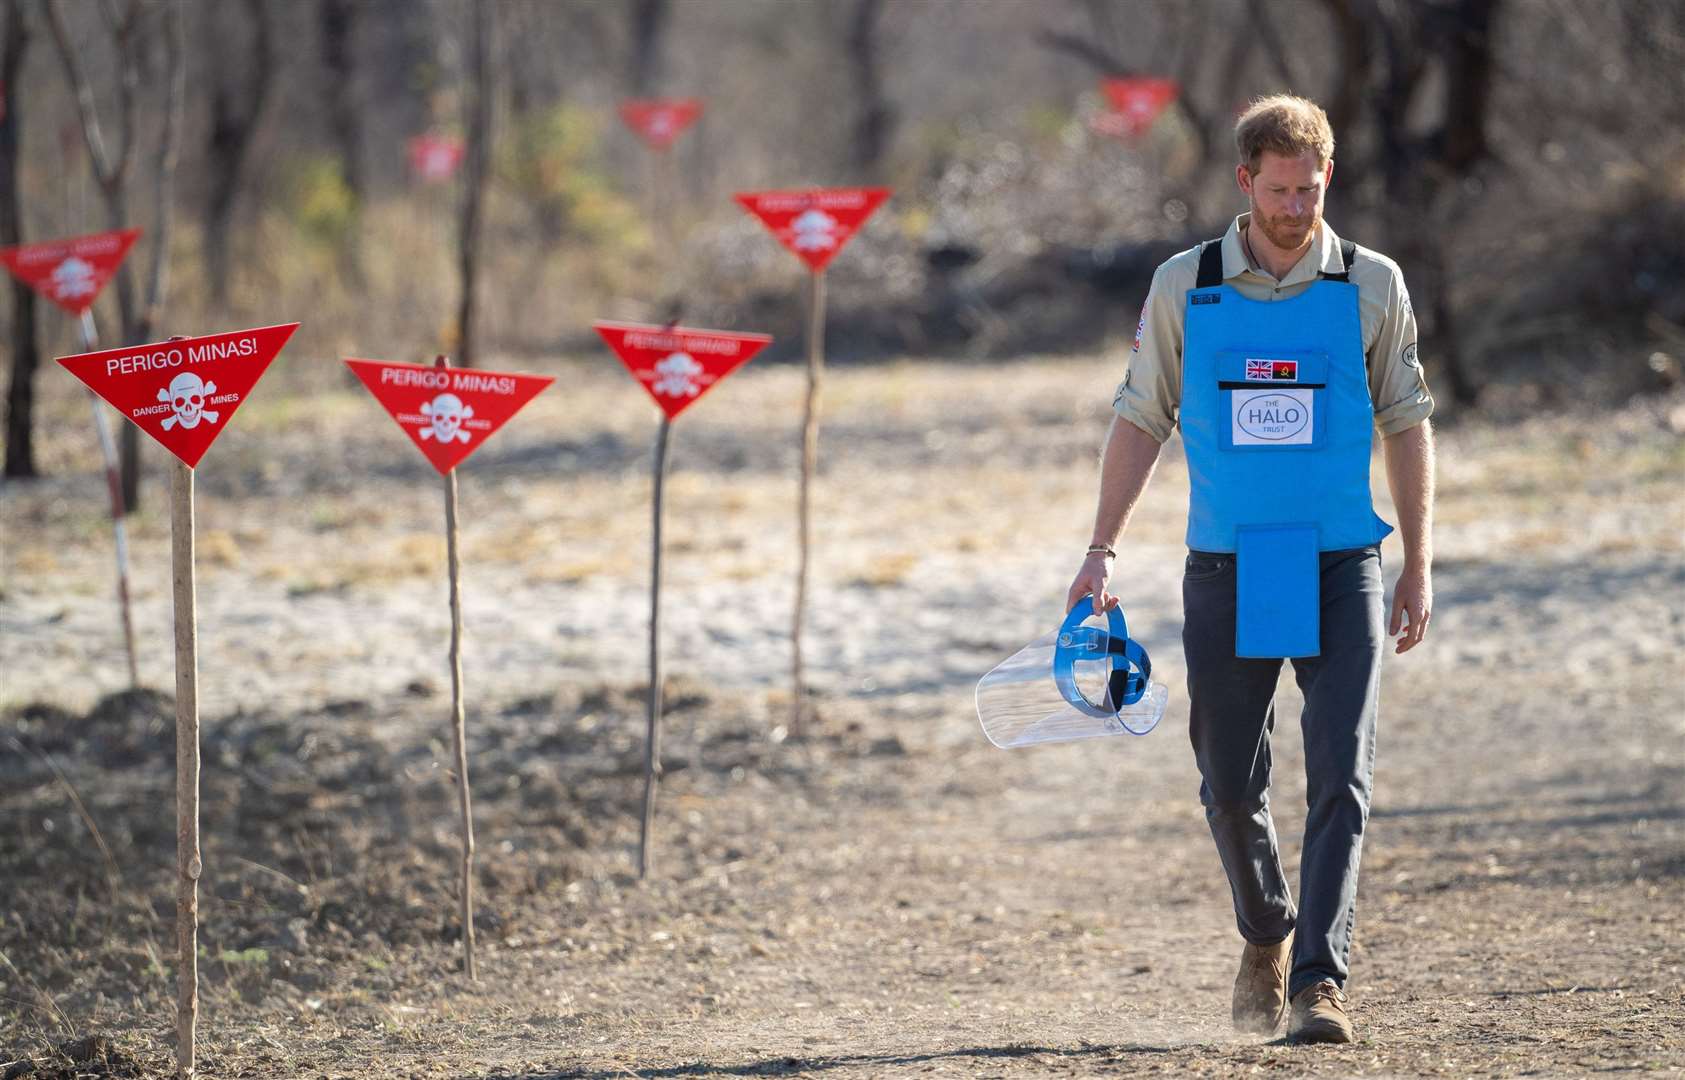 Harry walked through a minefield in Angola in 2019 (Dominic Lipimski/PA)